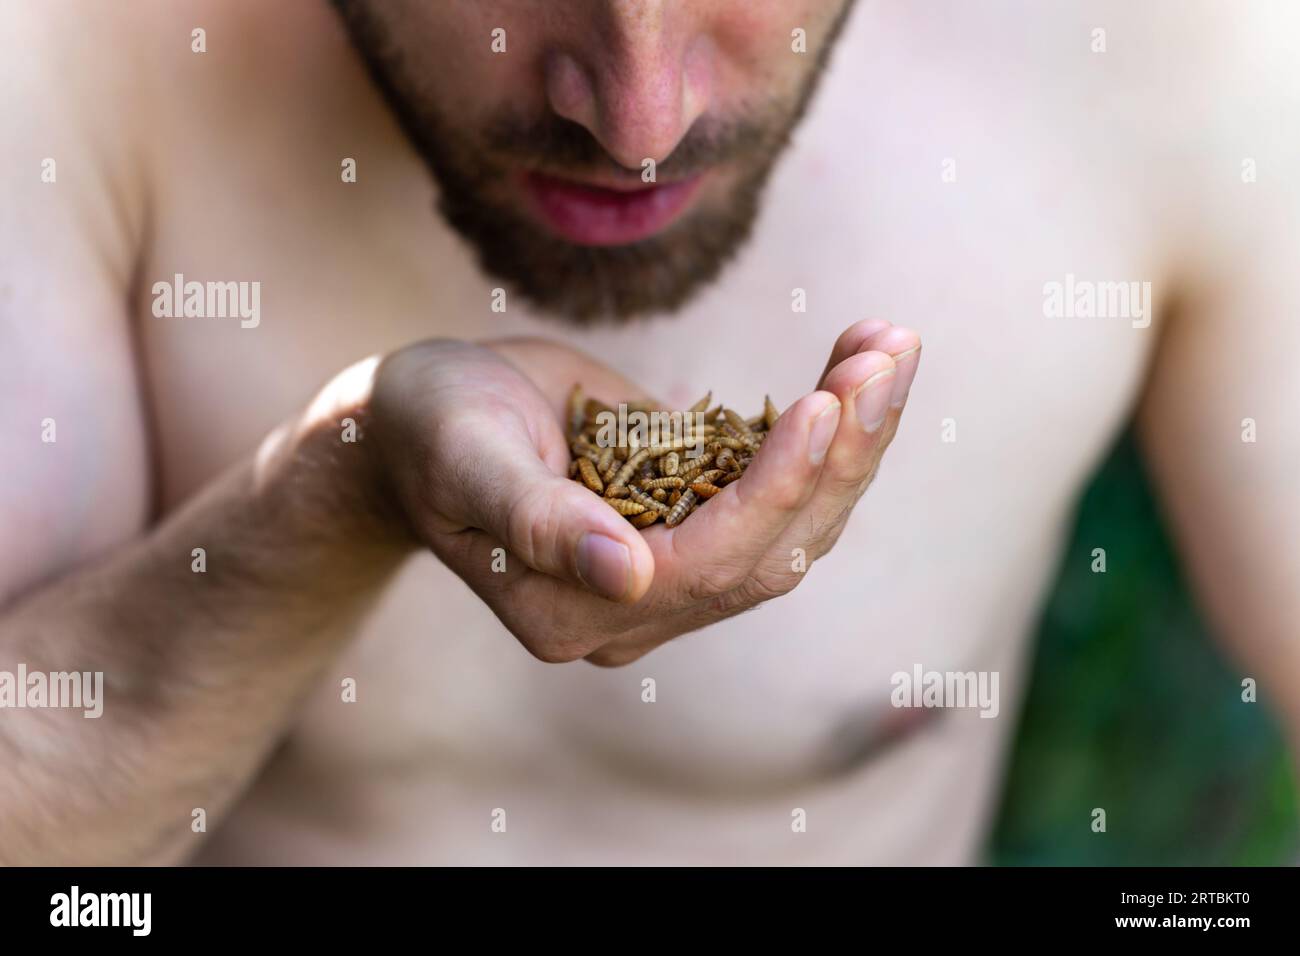 Man eating mealworms, concept of survivalism and alternative diet. Selective focus Stock Photo